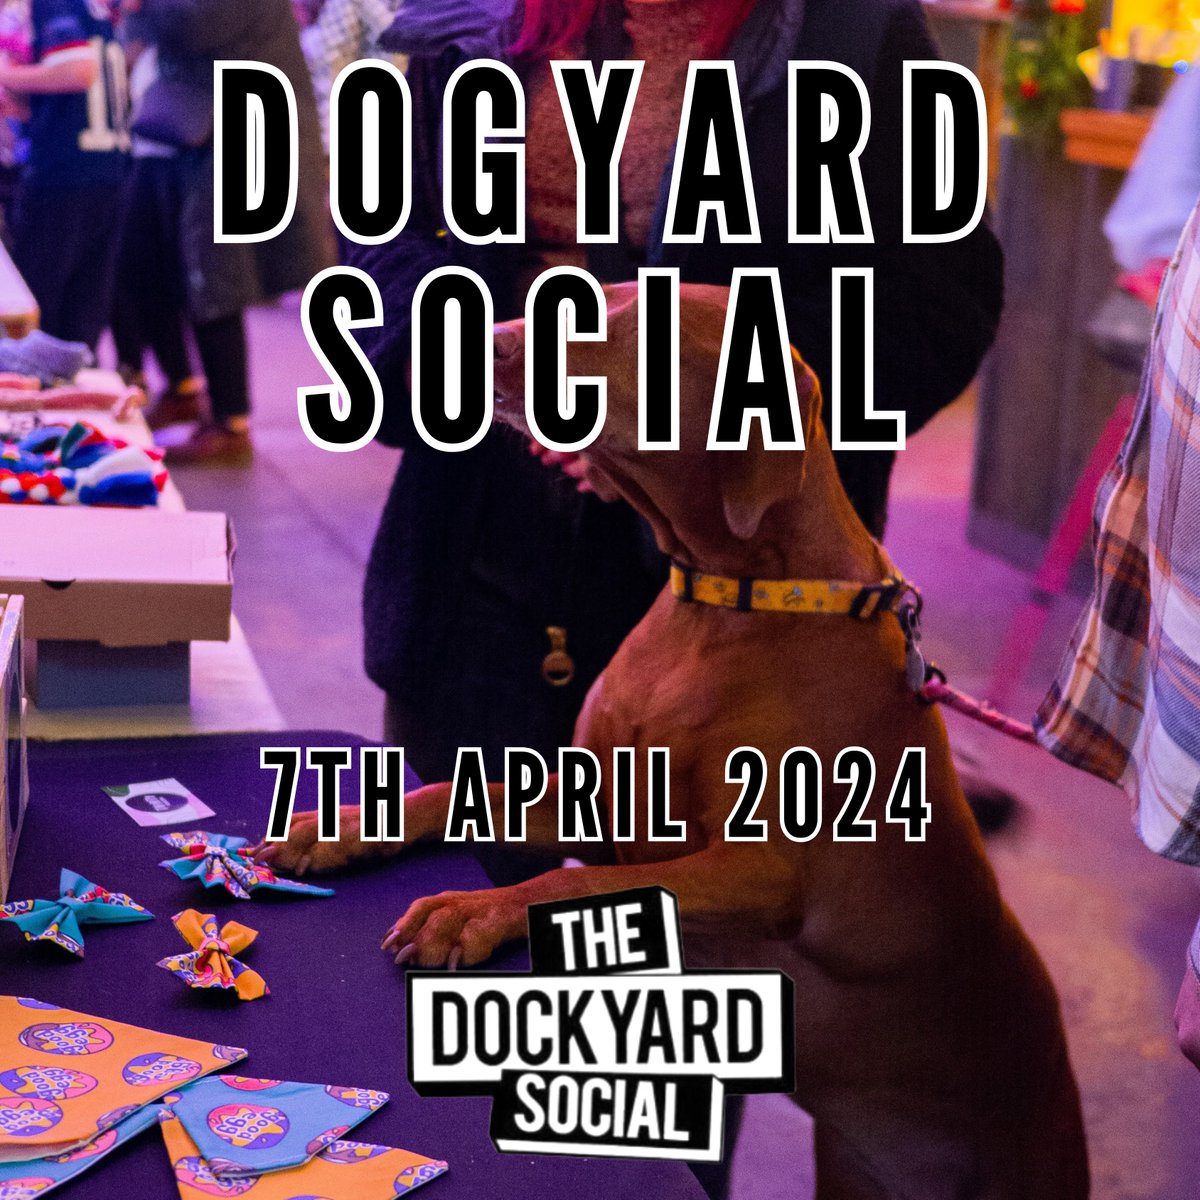 Dogyard Social returns on Sunday 7th April and the team at @DockyardSocial welcome all dogs and owners alike to come and enjoy the market stalls specially aimed at bits and bobs for your furry friend! 𝗙𝗶𝗻𝗱 𝗼𝘂𝘁 𝗺𝗼𝗿𝗲: tinyurl.com/4u48dyrr